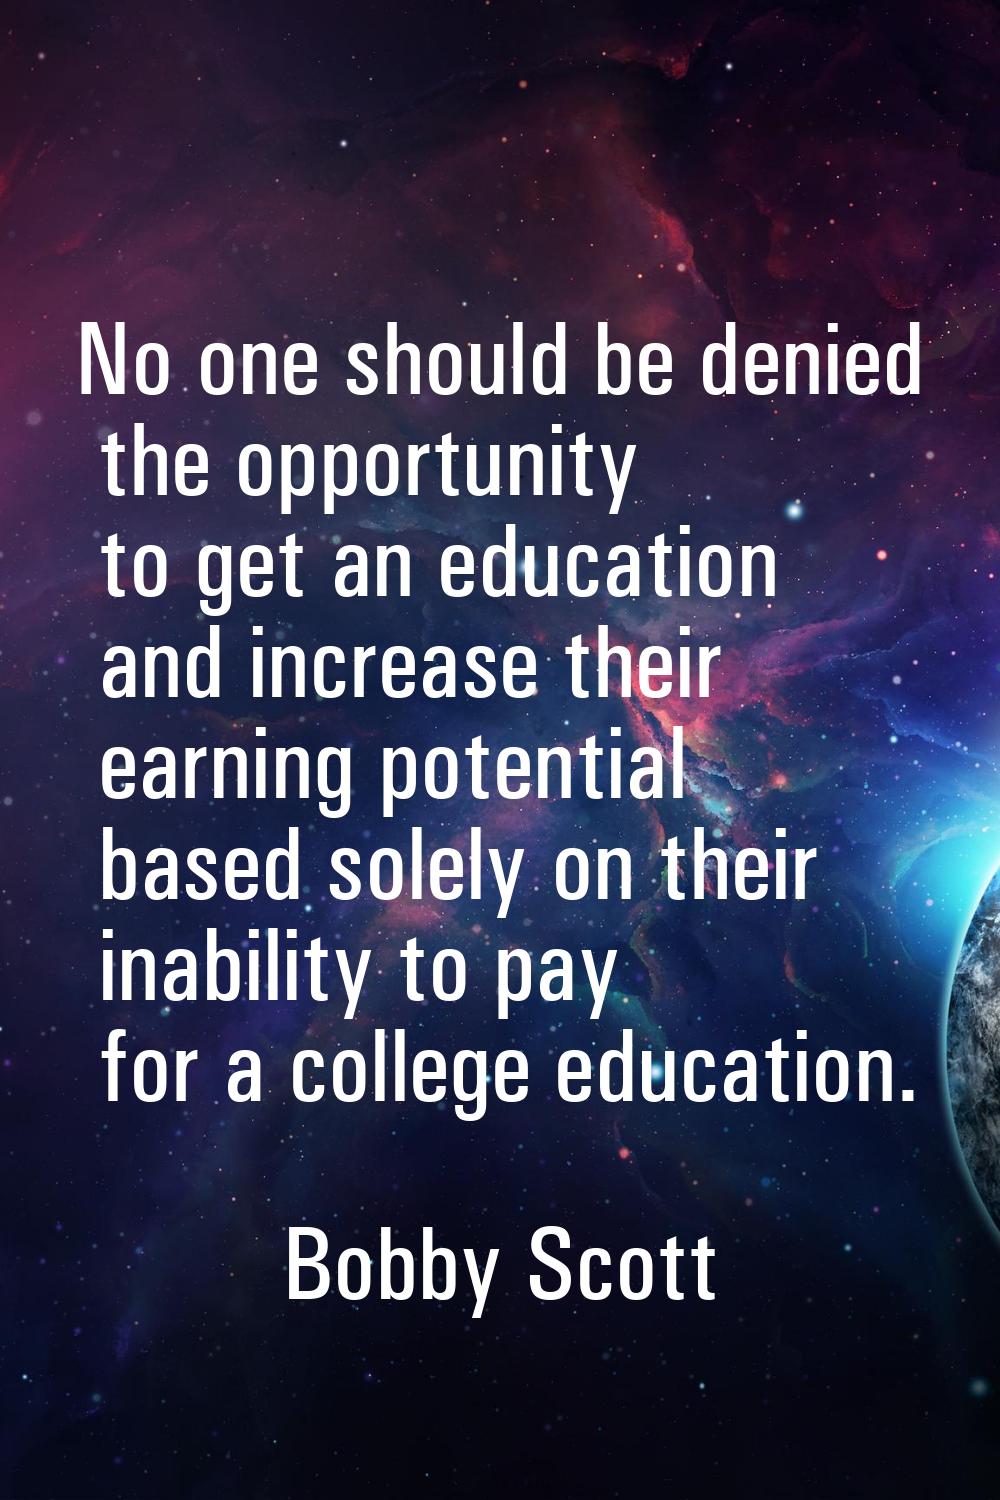 No one should be denied the opportunity to get an education and increase their earning potential ba